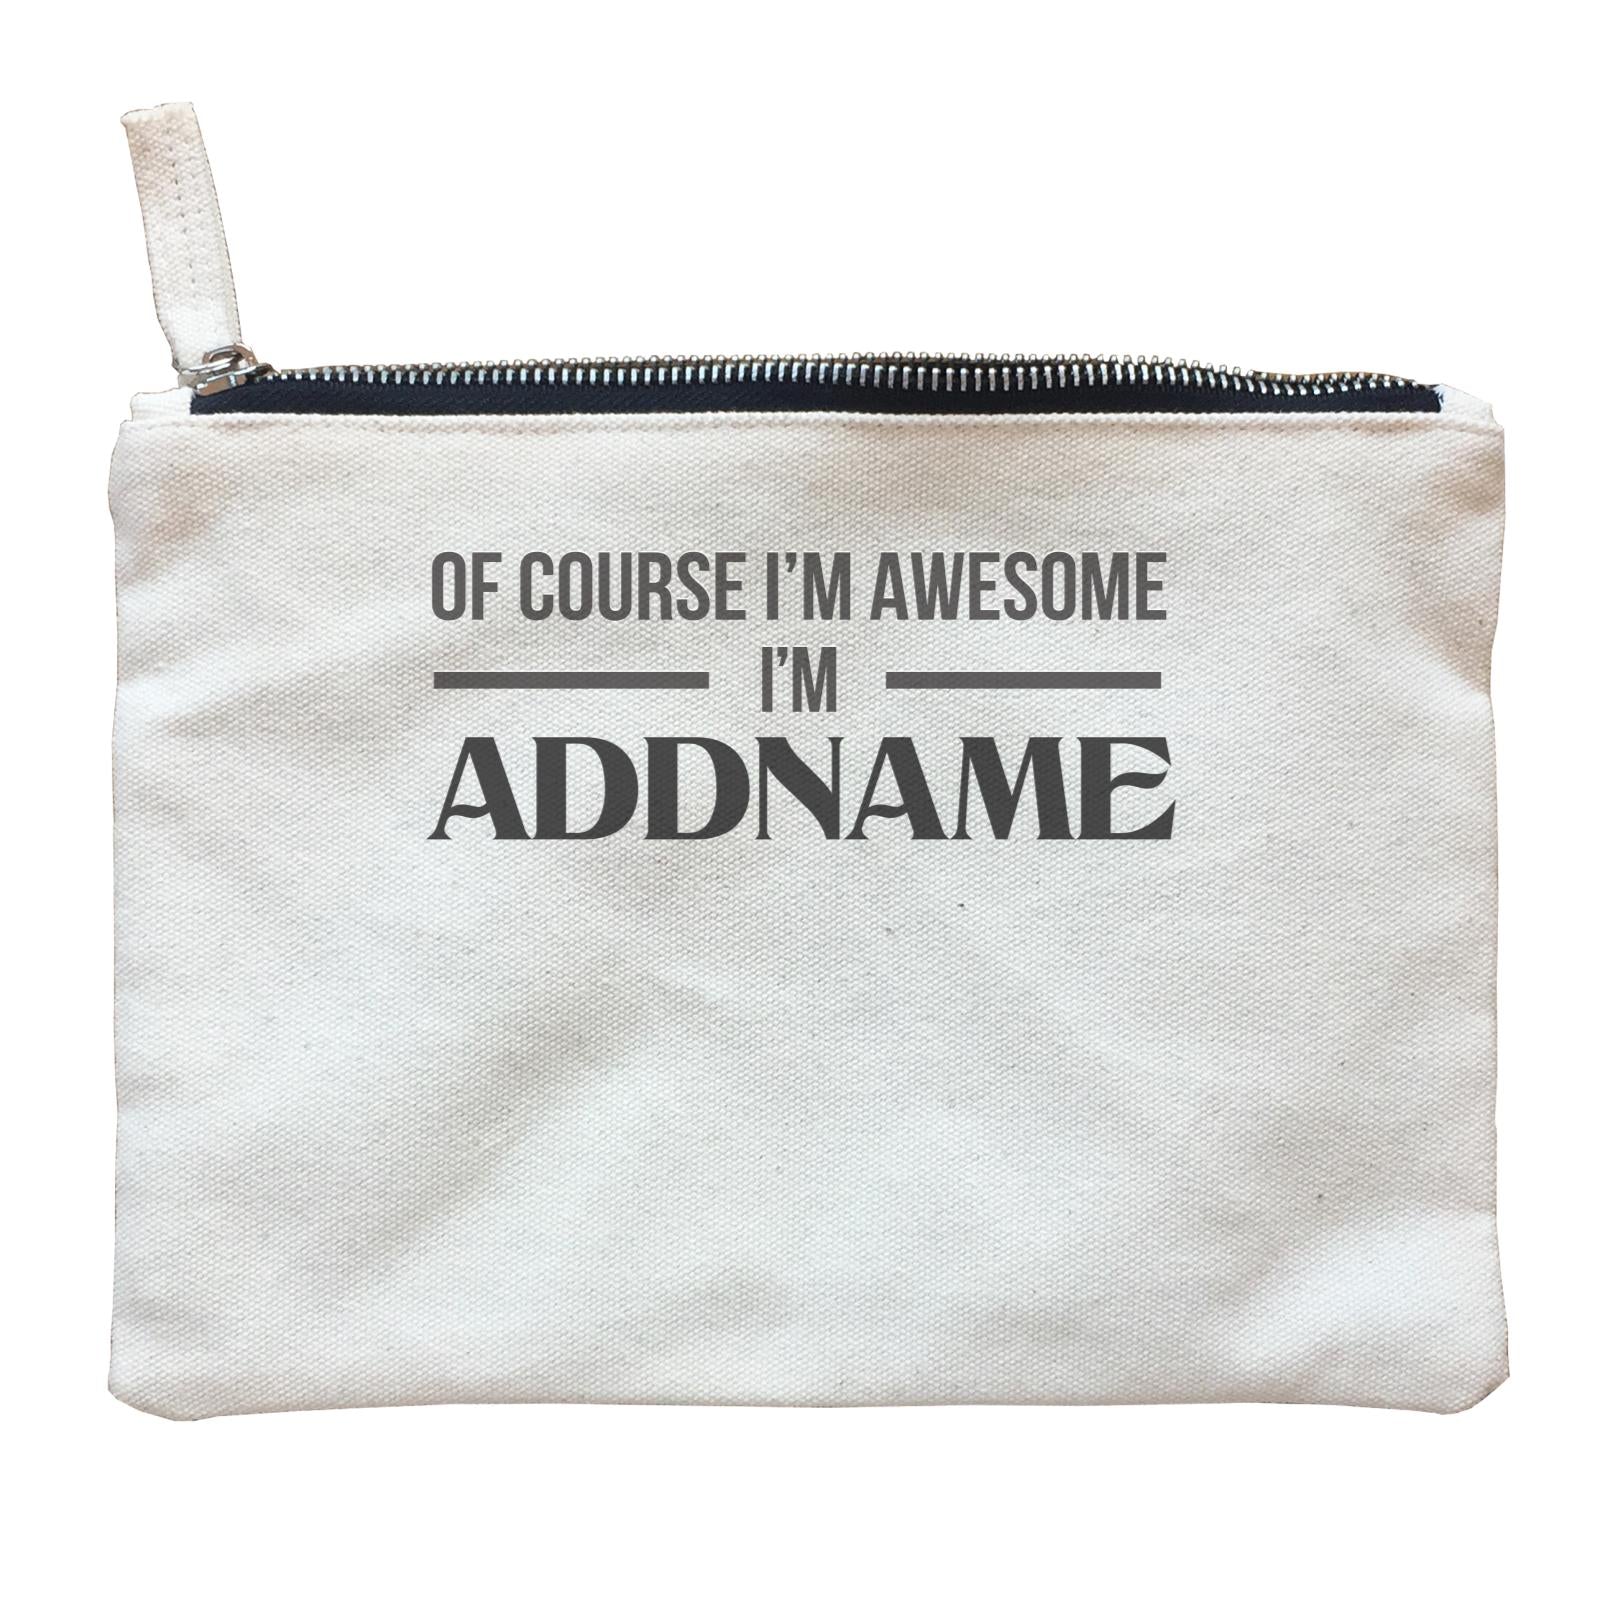 Personalize It Awesome Of Course I'm Awesome I'm Addname Zipper Pouch